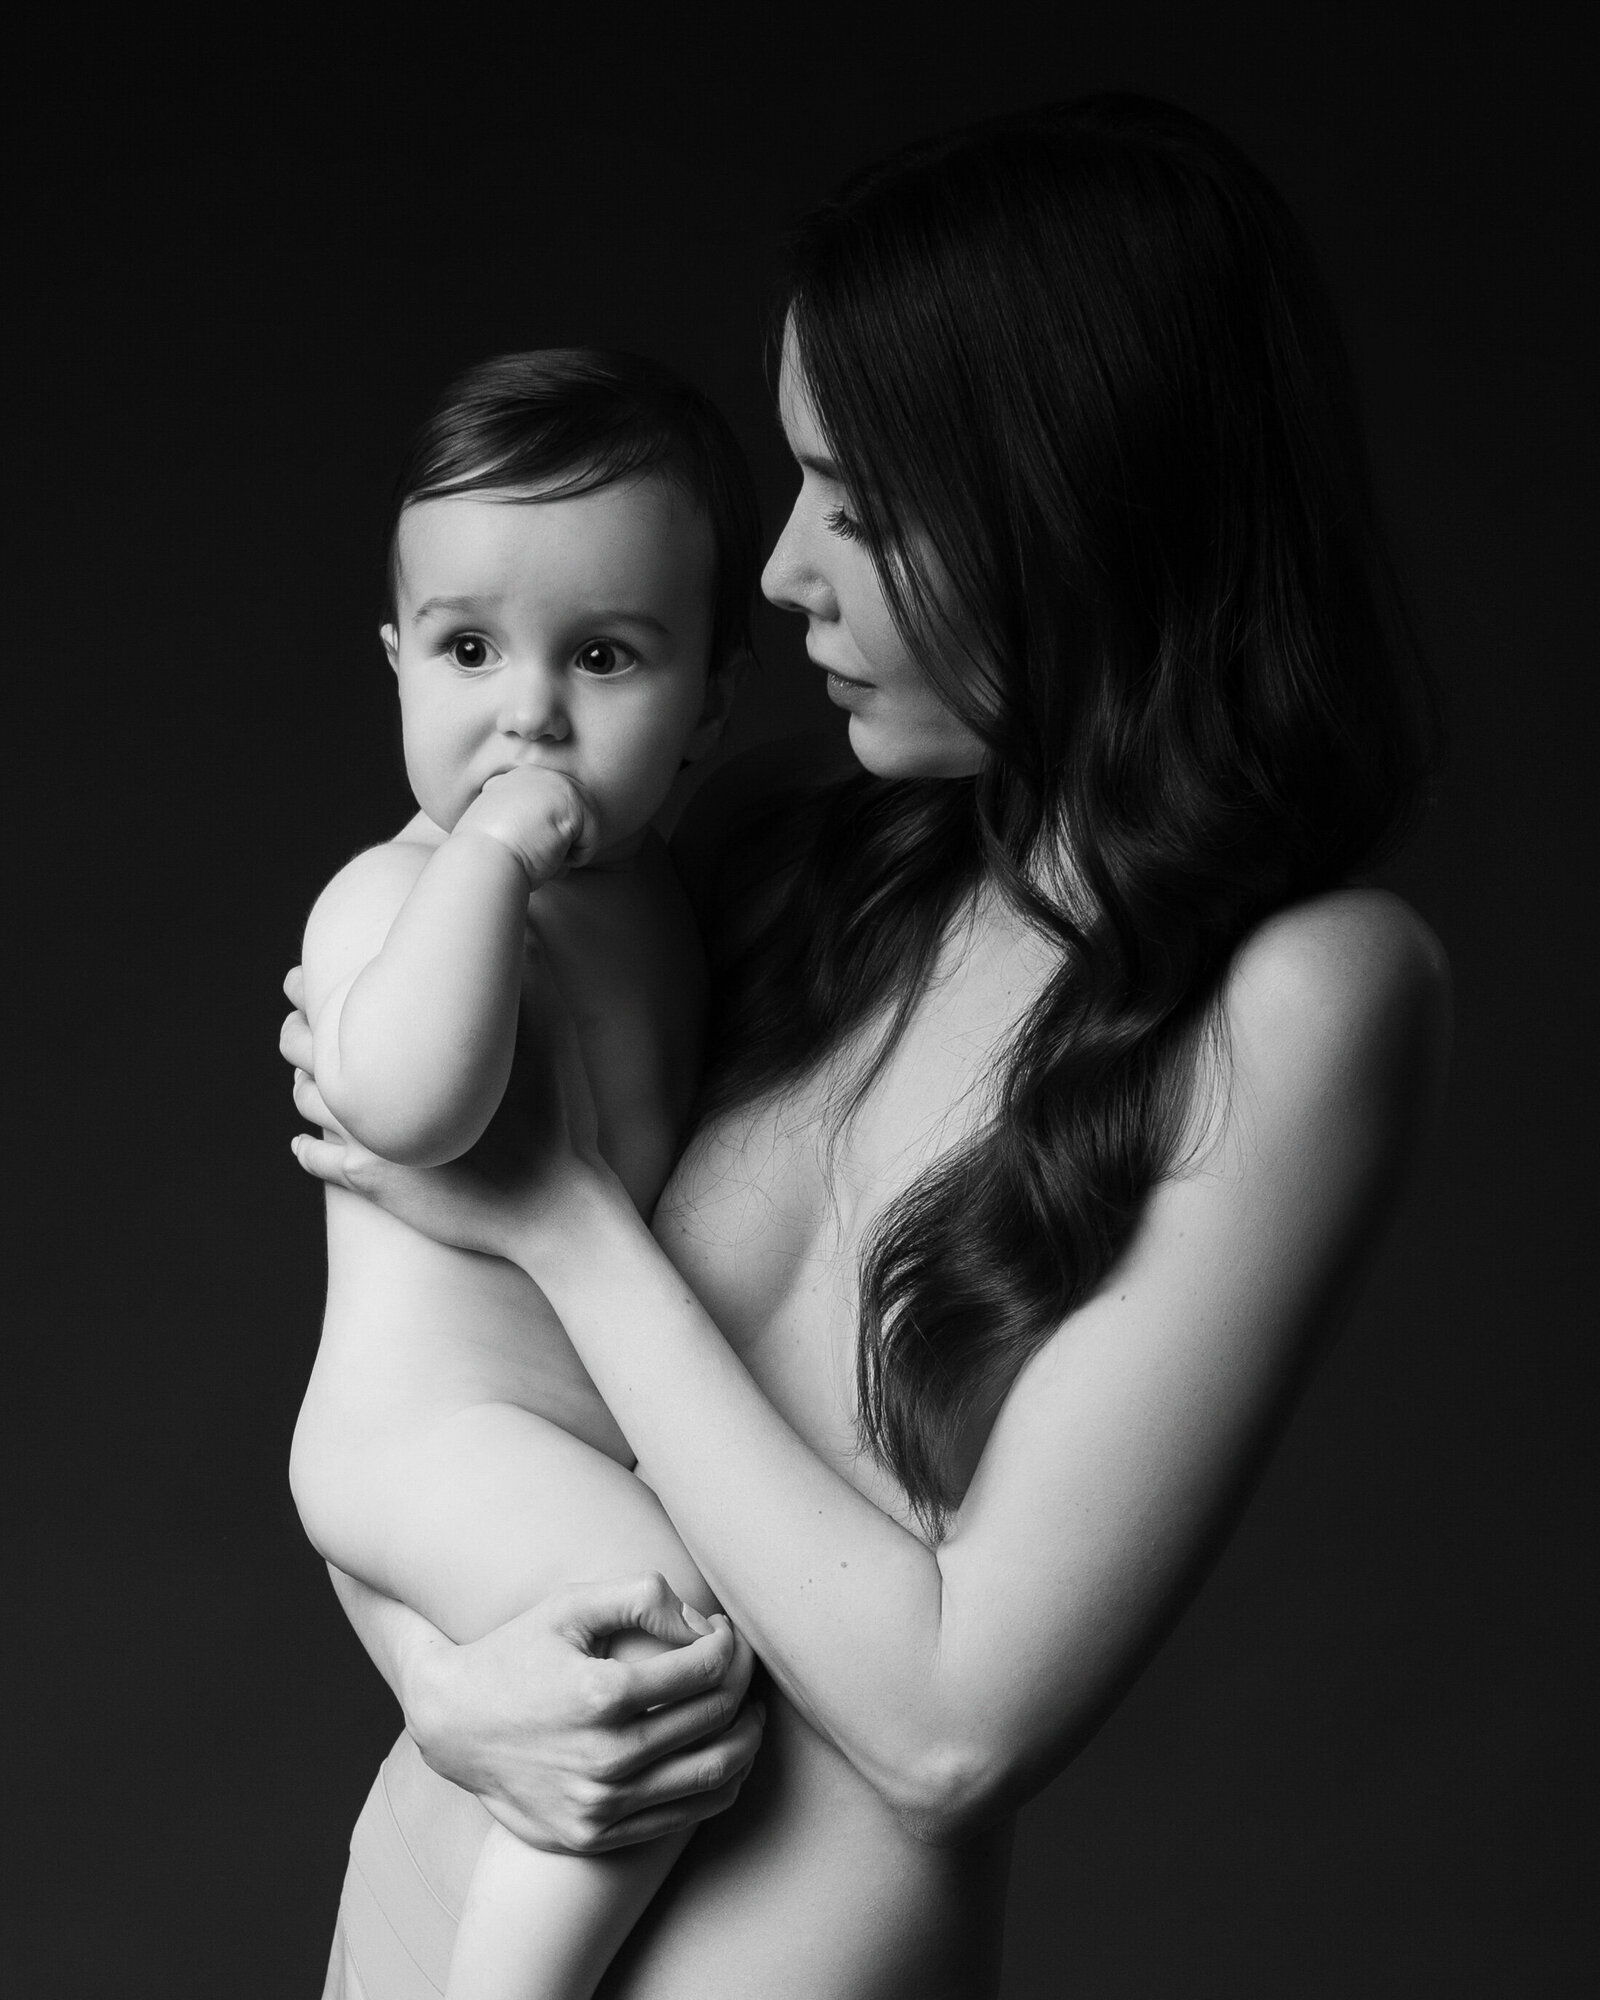 Mommy and me portrait by Daisy Rey in Black and white